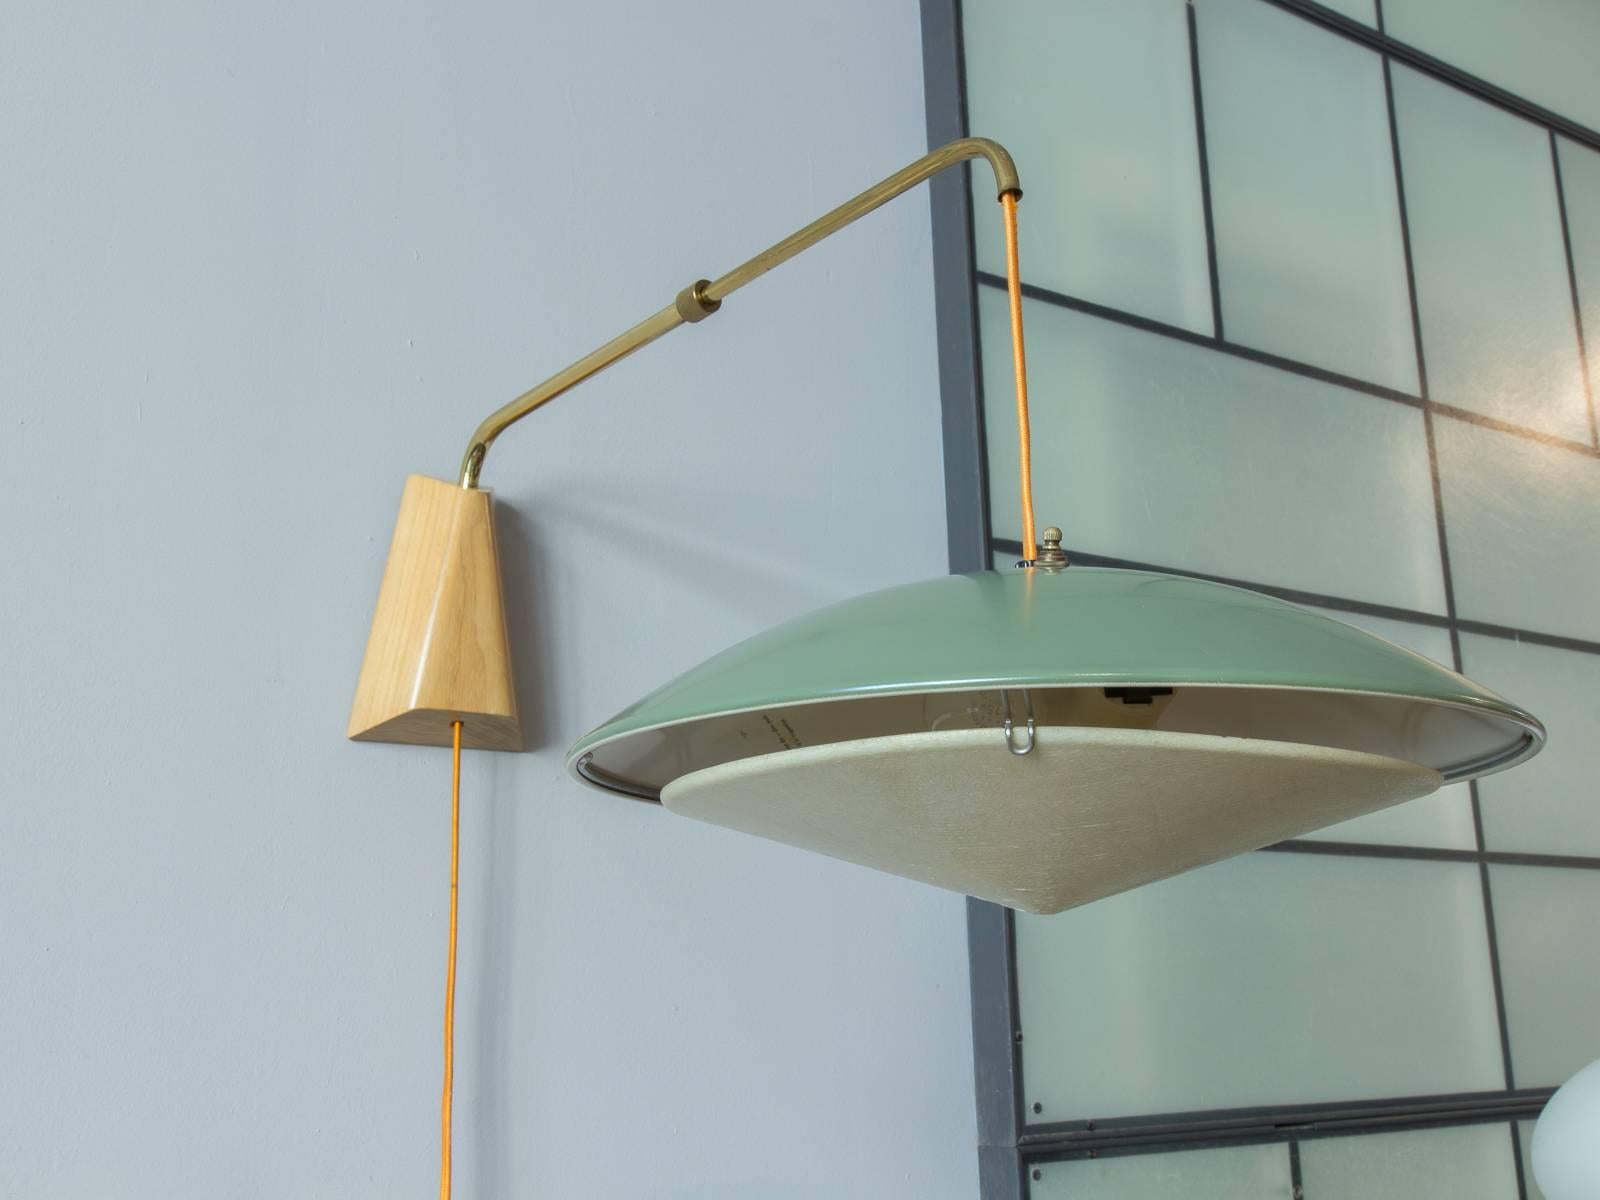 A vintage design by Gerald Thurston for Lightolier. These clever lights use a weighted pulley to adjust the height of the lamp, which can also telescope in and out from the wall and tilt from side to side. The inner shade is fiberglass, which gives